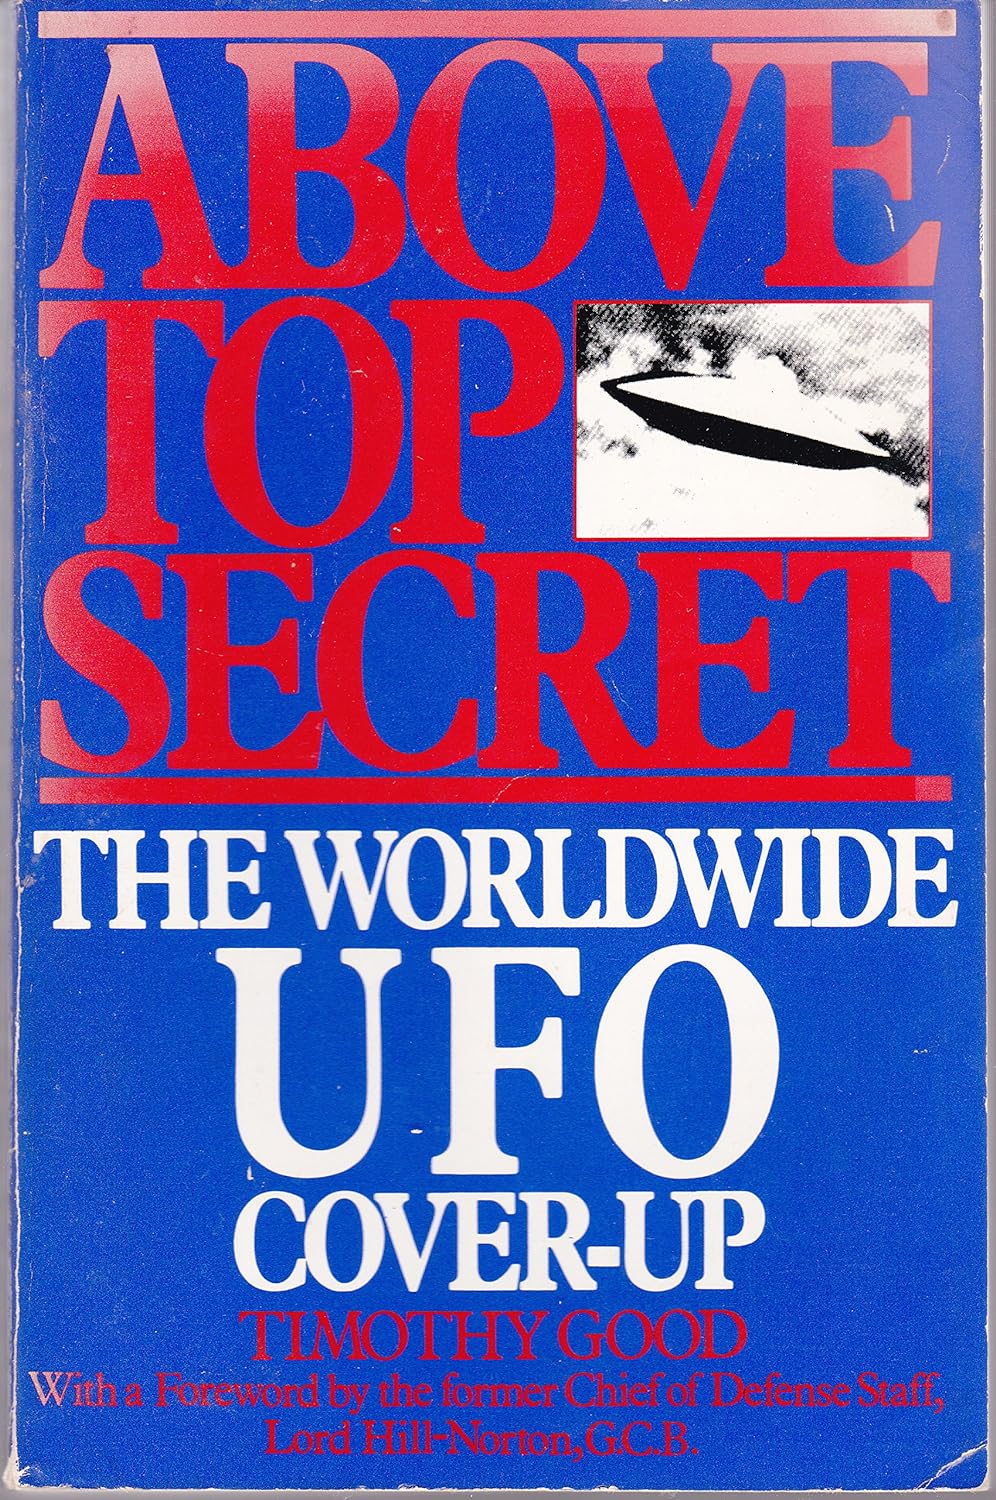 "Above Top Secret: The Worldwide UFO Cover-up" by Timothy Good